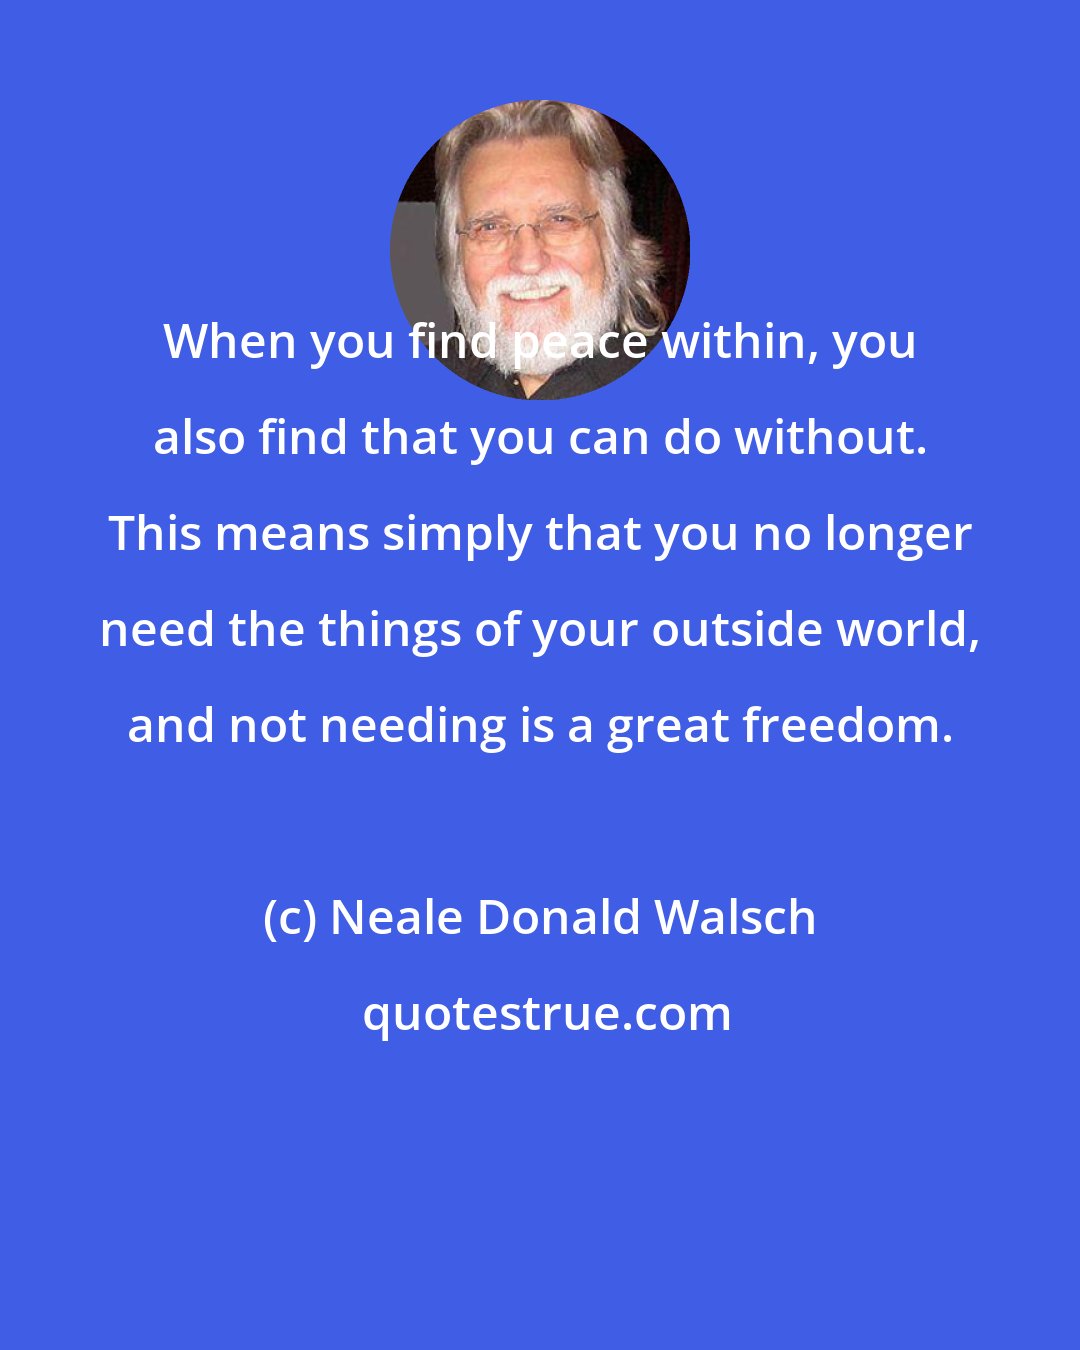 Neale Donald Walsch: When you find peace within, you also find that you can do without. This means simply that you no longer need the things of your outside world, and not needing is a great freedom.